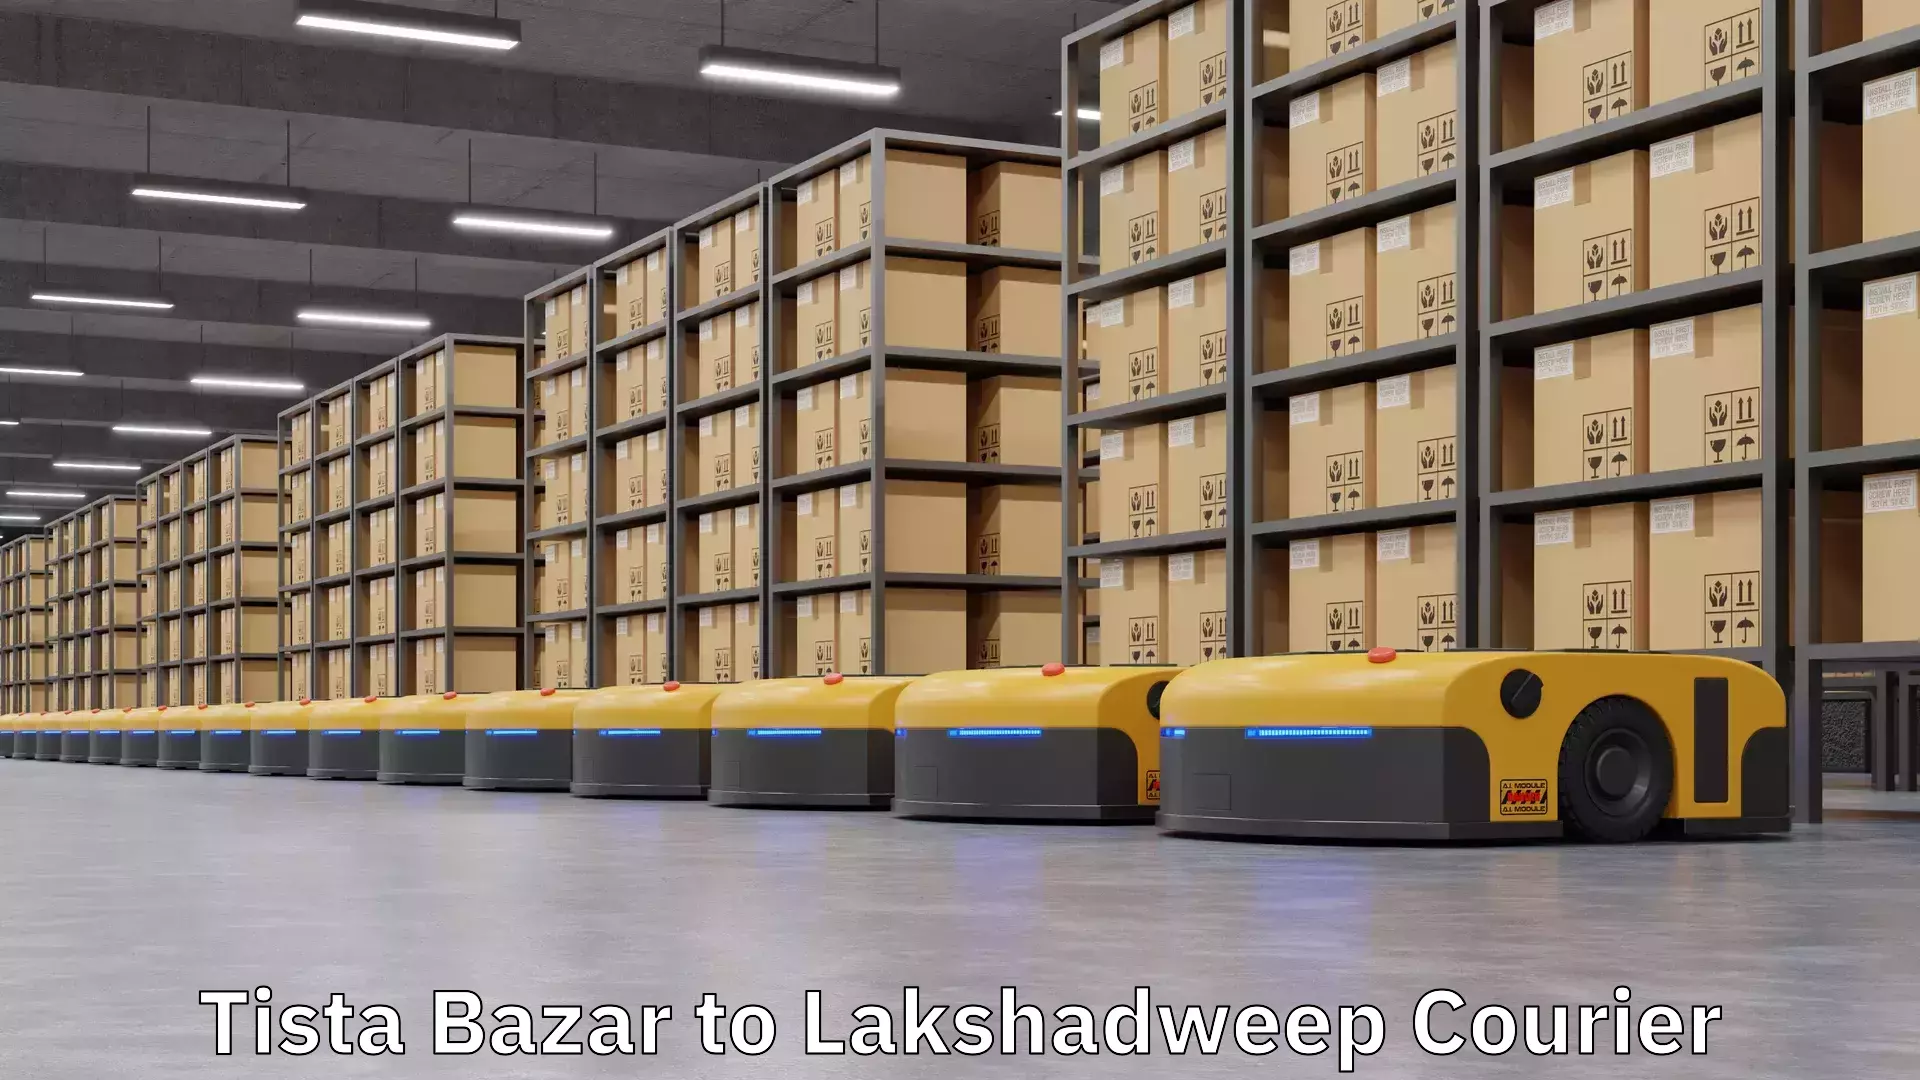 End-to-end delivery Tista Bazar to Lakshadweep